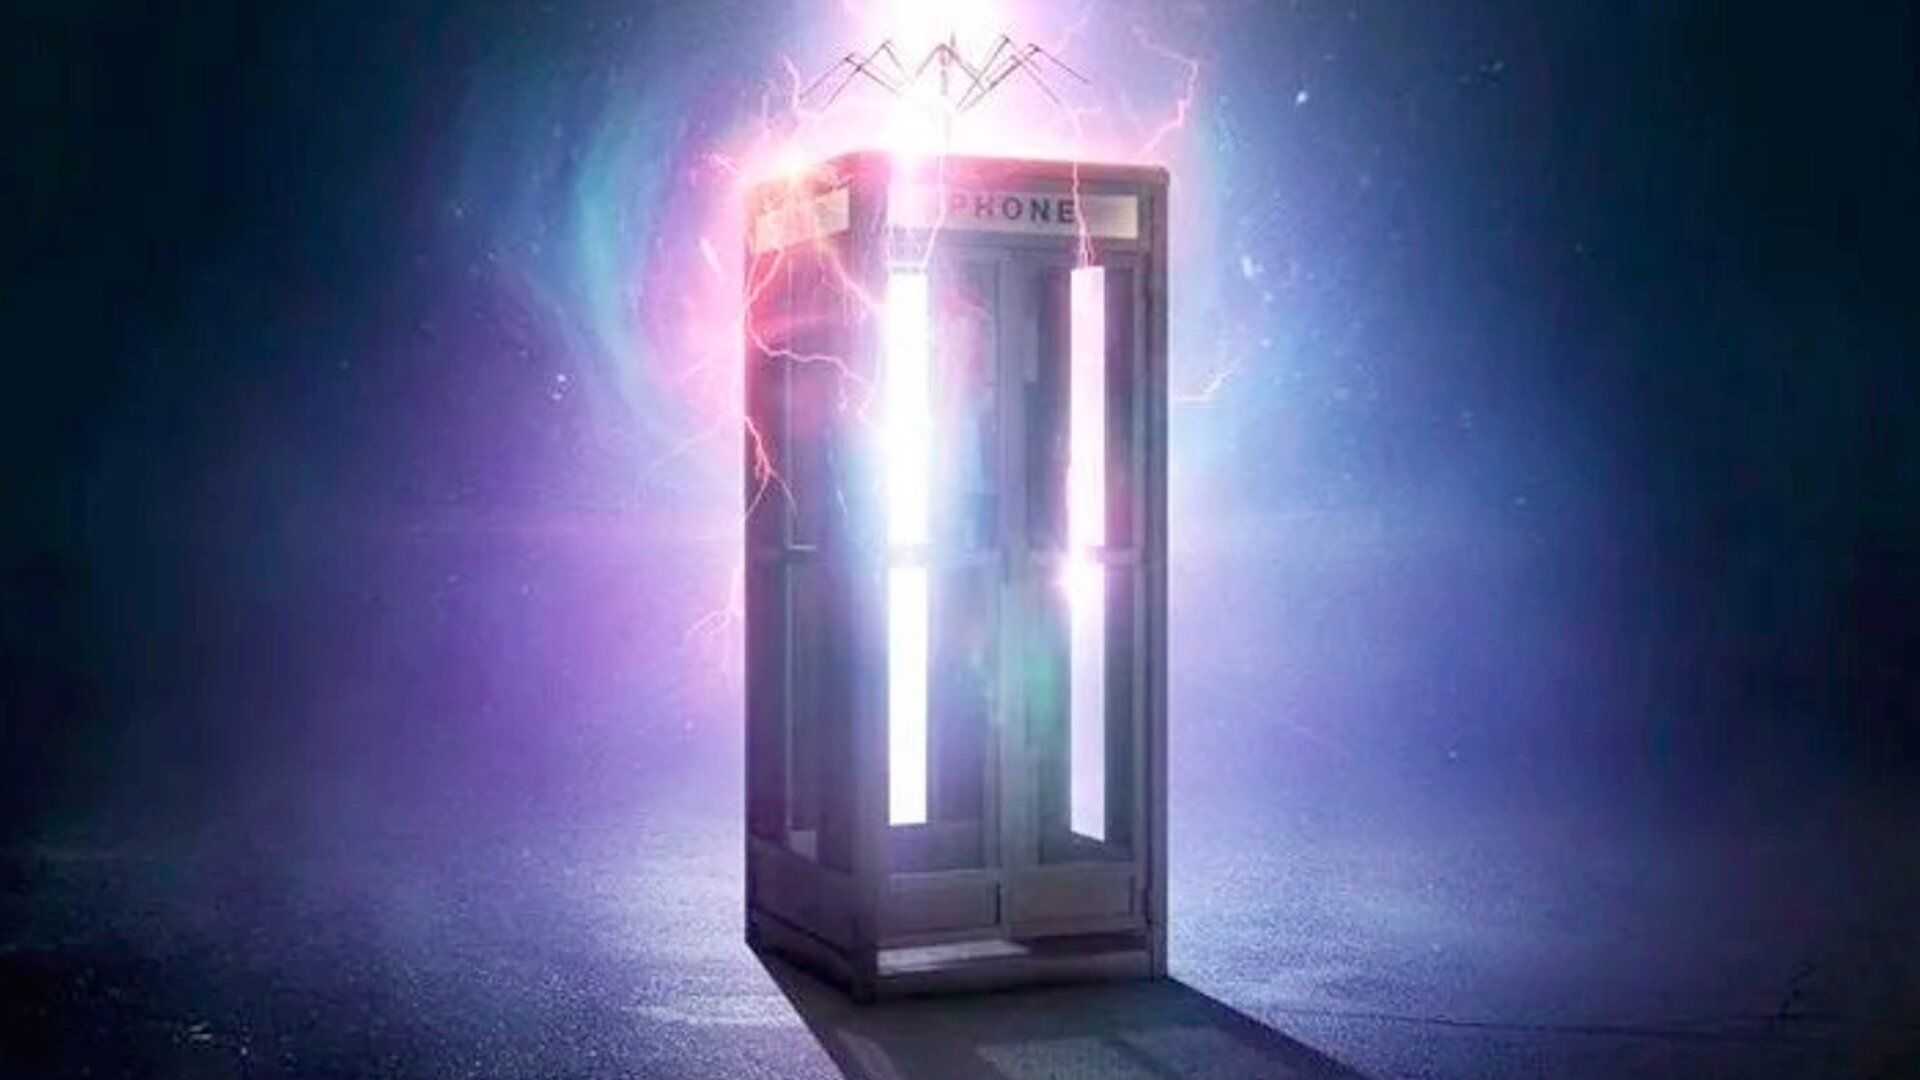 BILL & TED FACE THE MUSIC Gets A New Poster Featuring The Time Traveling Phone Booth